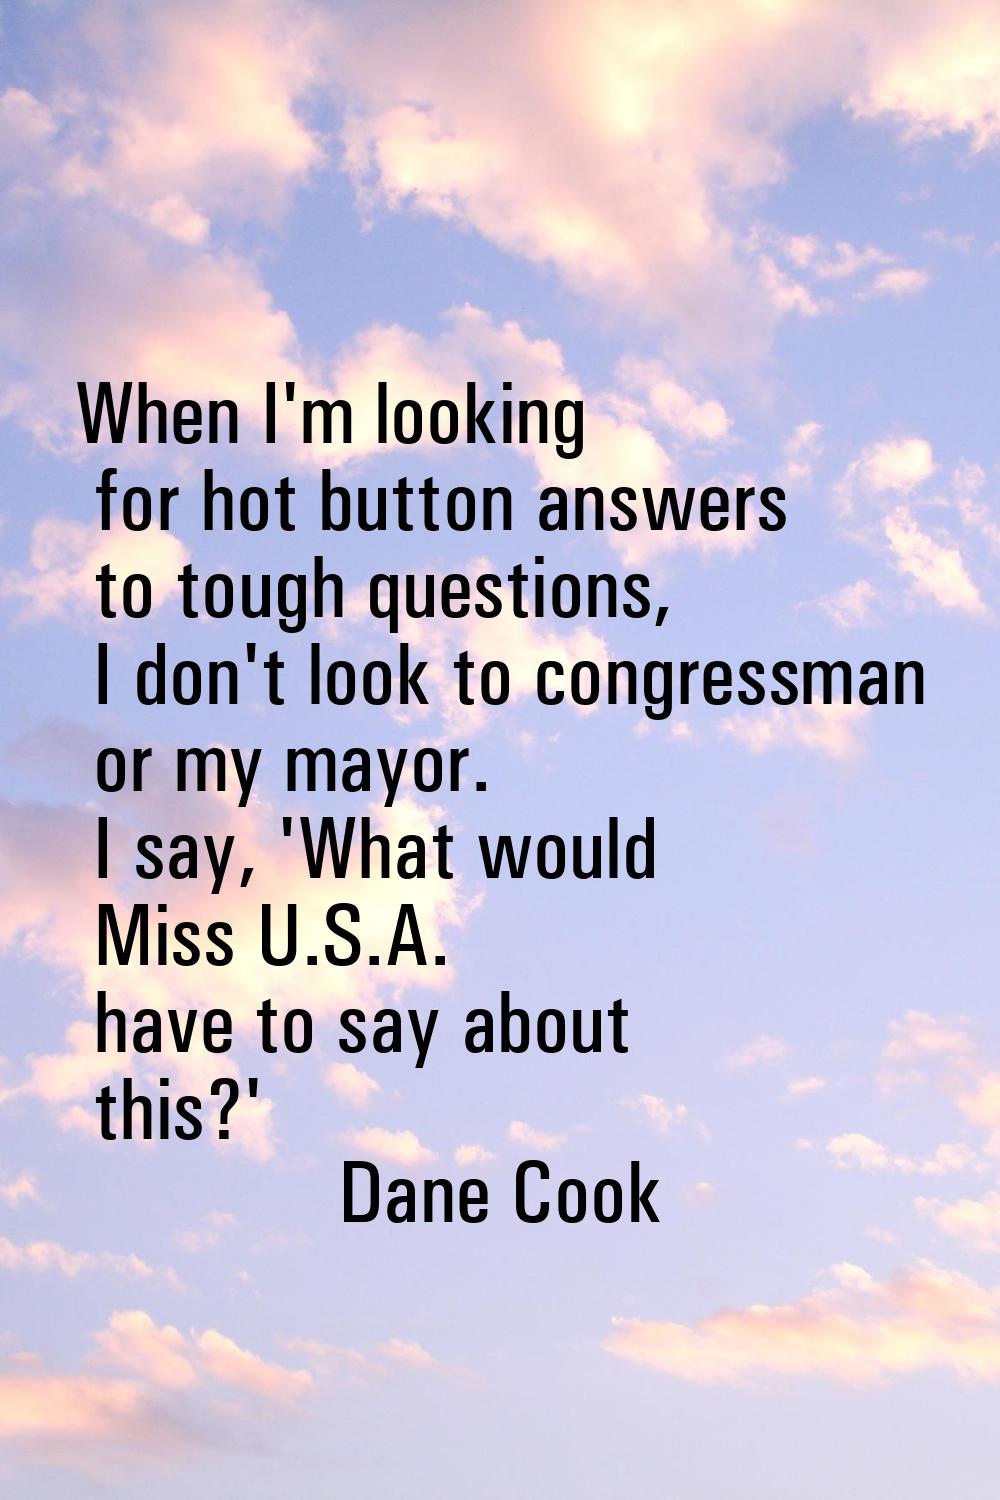 When I'm looking for hot button answers to tough questions, I don't look to congressman or my mayor